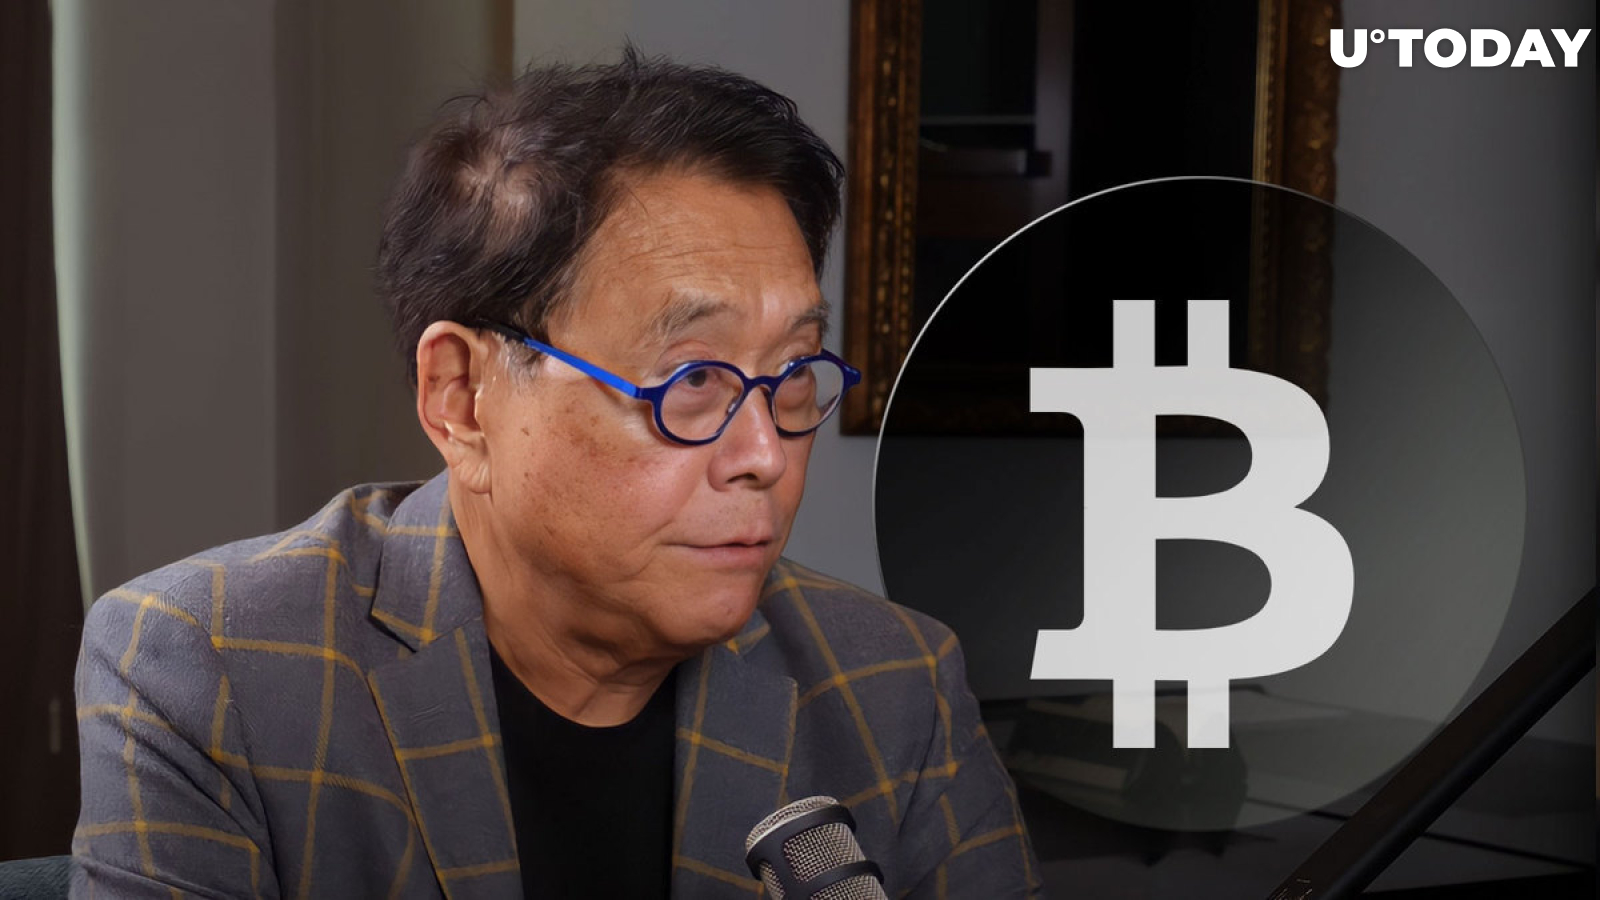 Bitcoin (BTC) Remains Best for Unstable Times, but There's Catch: 'Rich Dad Poor Dad' Author